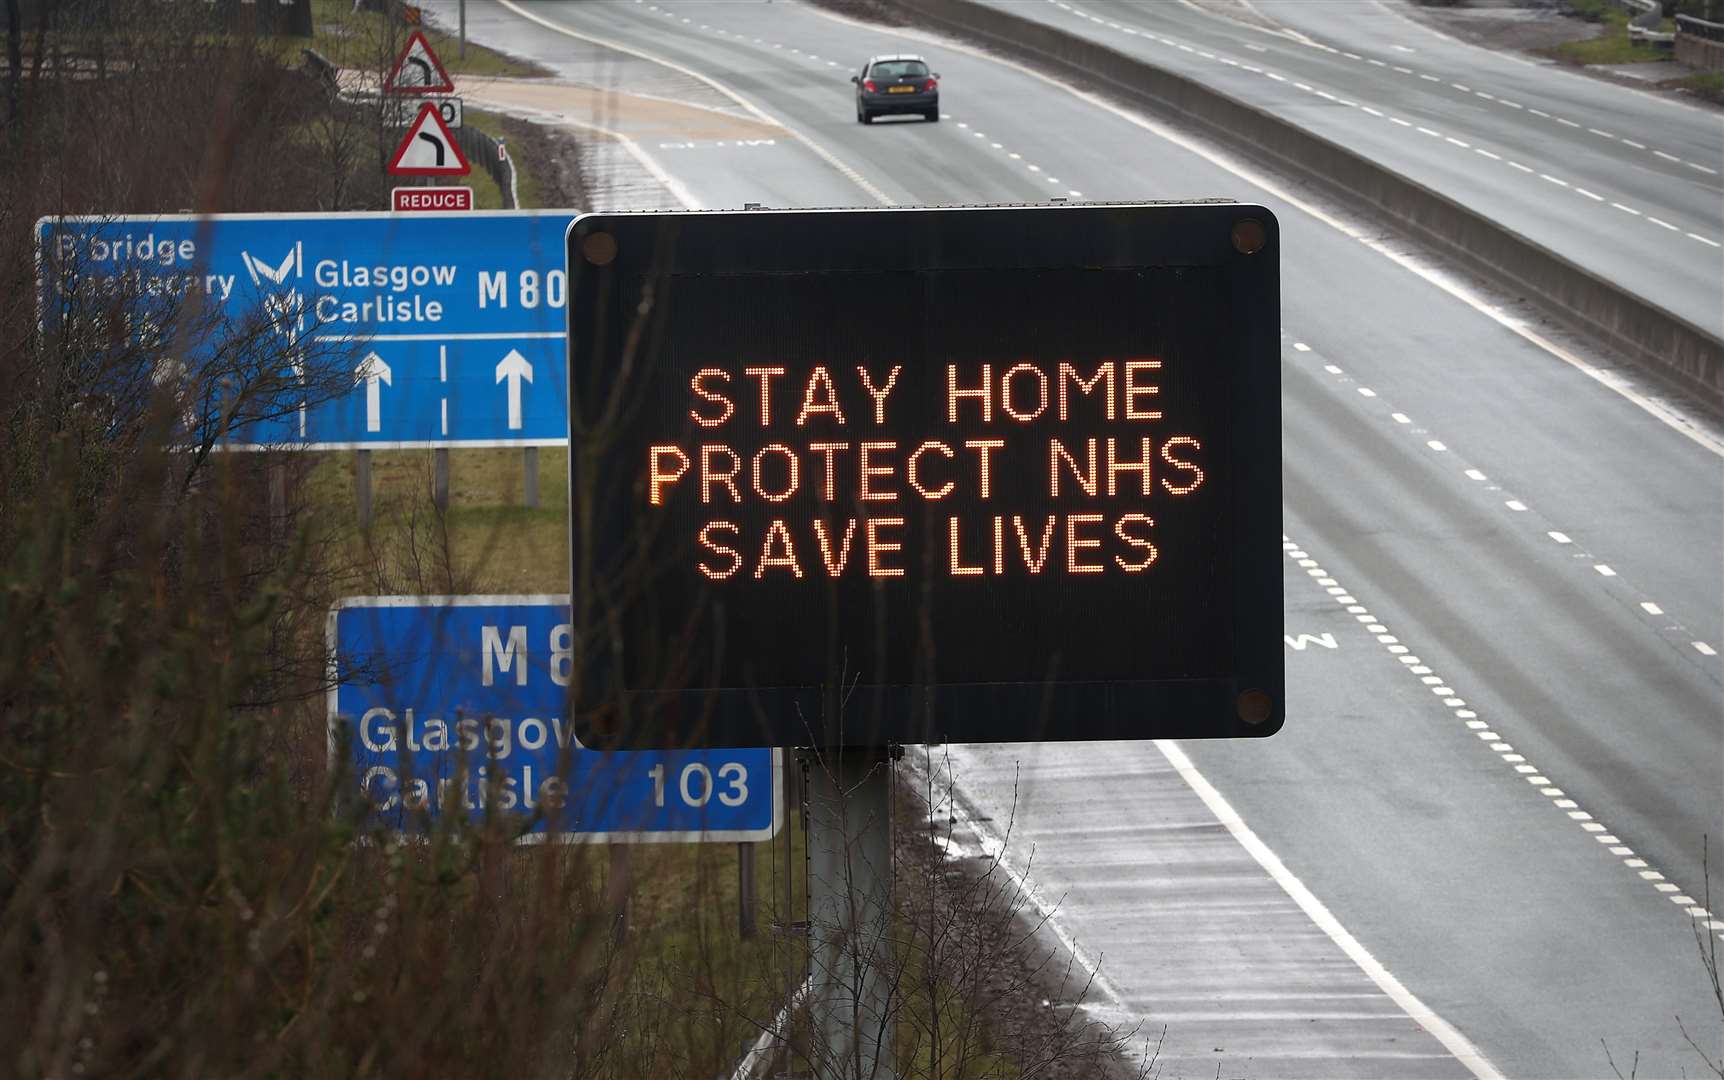 A road sign advising drivers to stay home, protect NHS, saves lives (Andrew Milligan/PA)